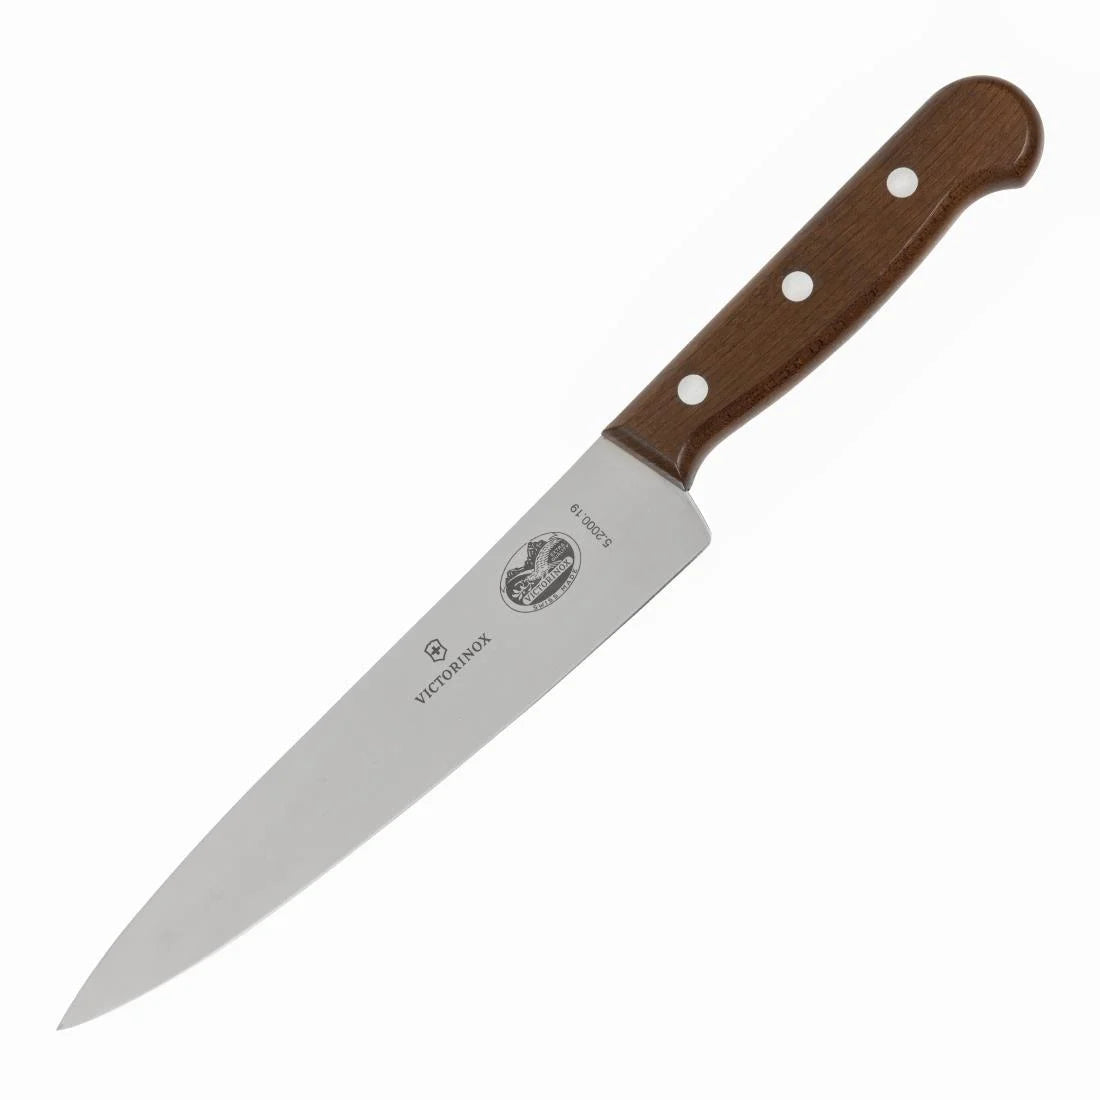 DP583 Victorinox Wooden Handled Carving Knife 19cm JD Catering Equipment Solutions Ltd